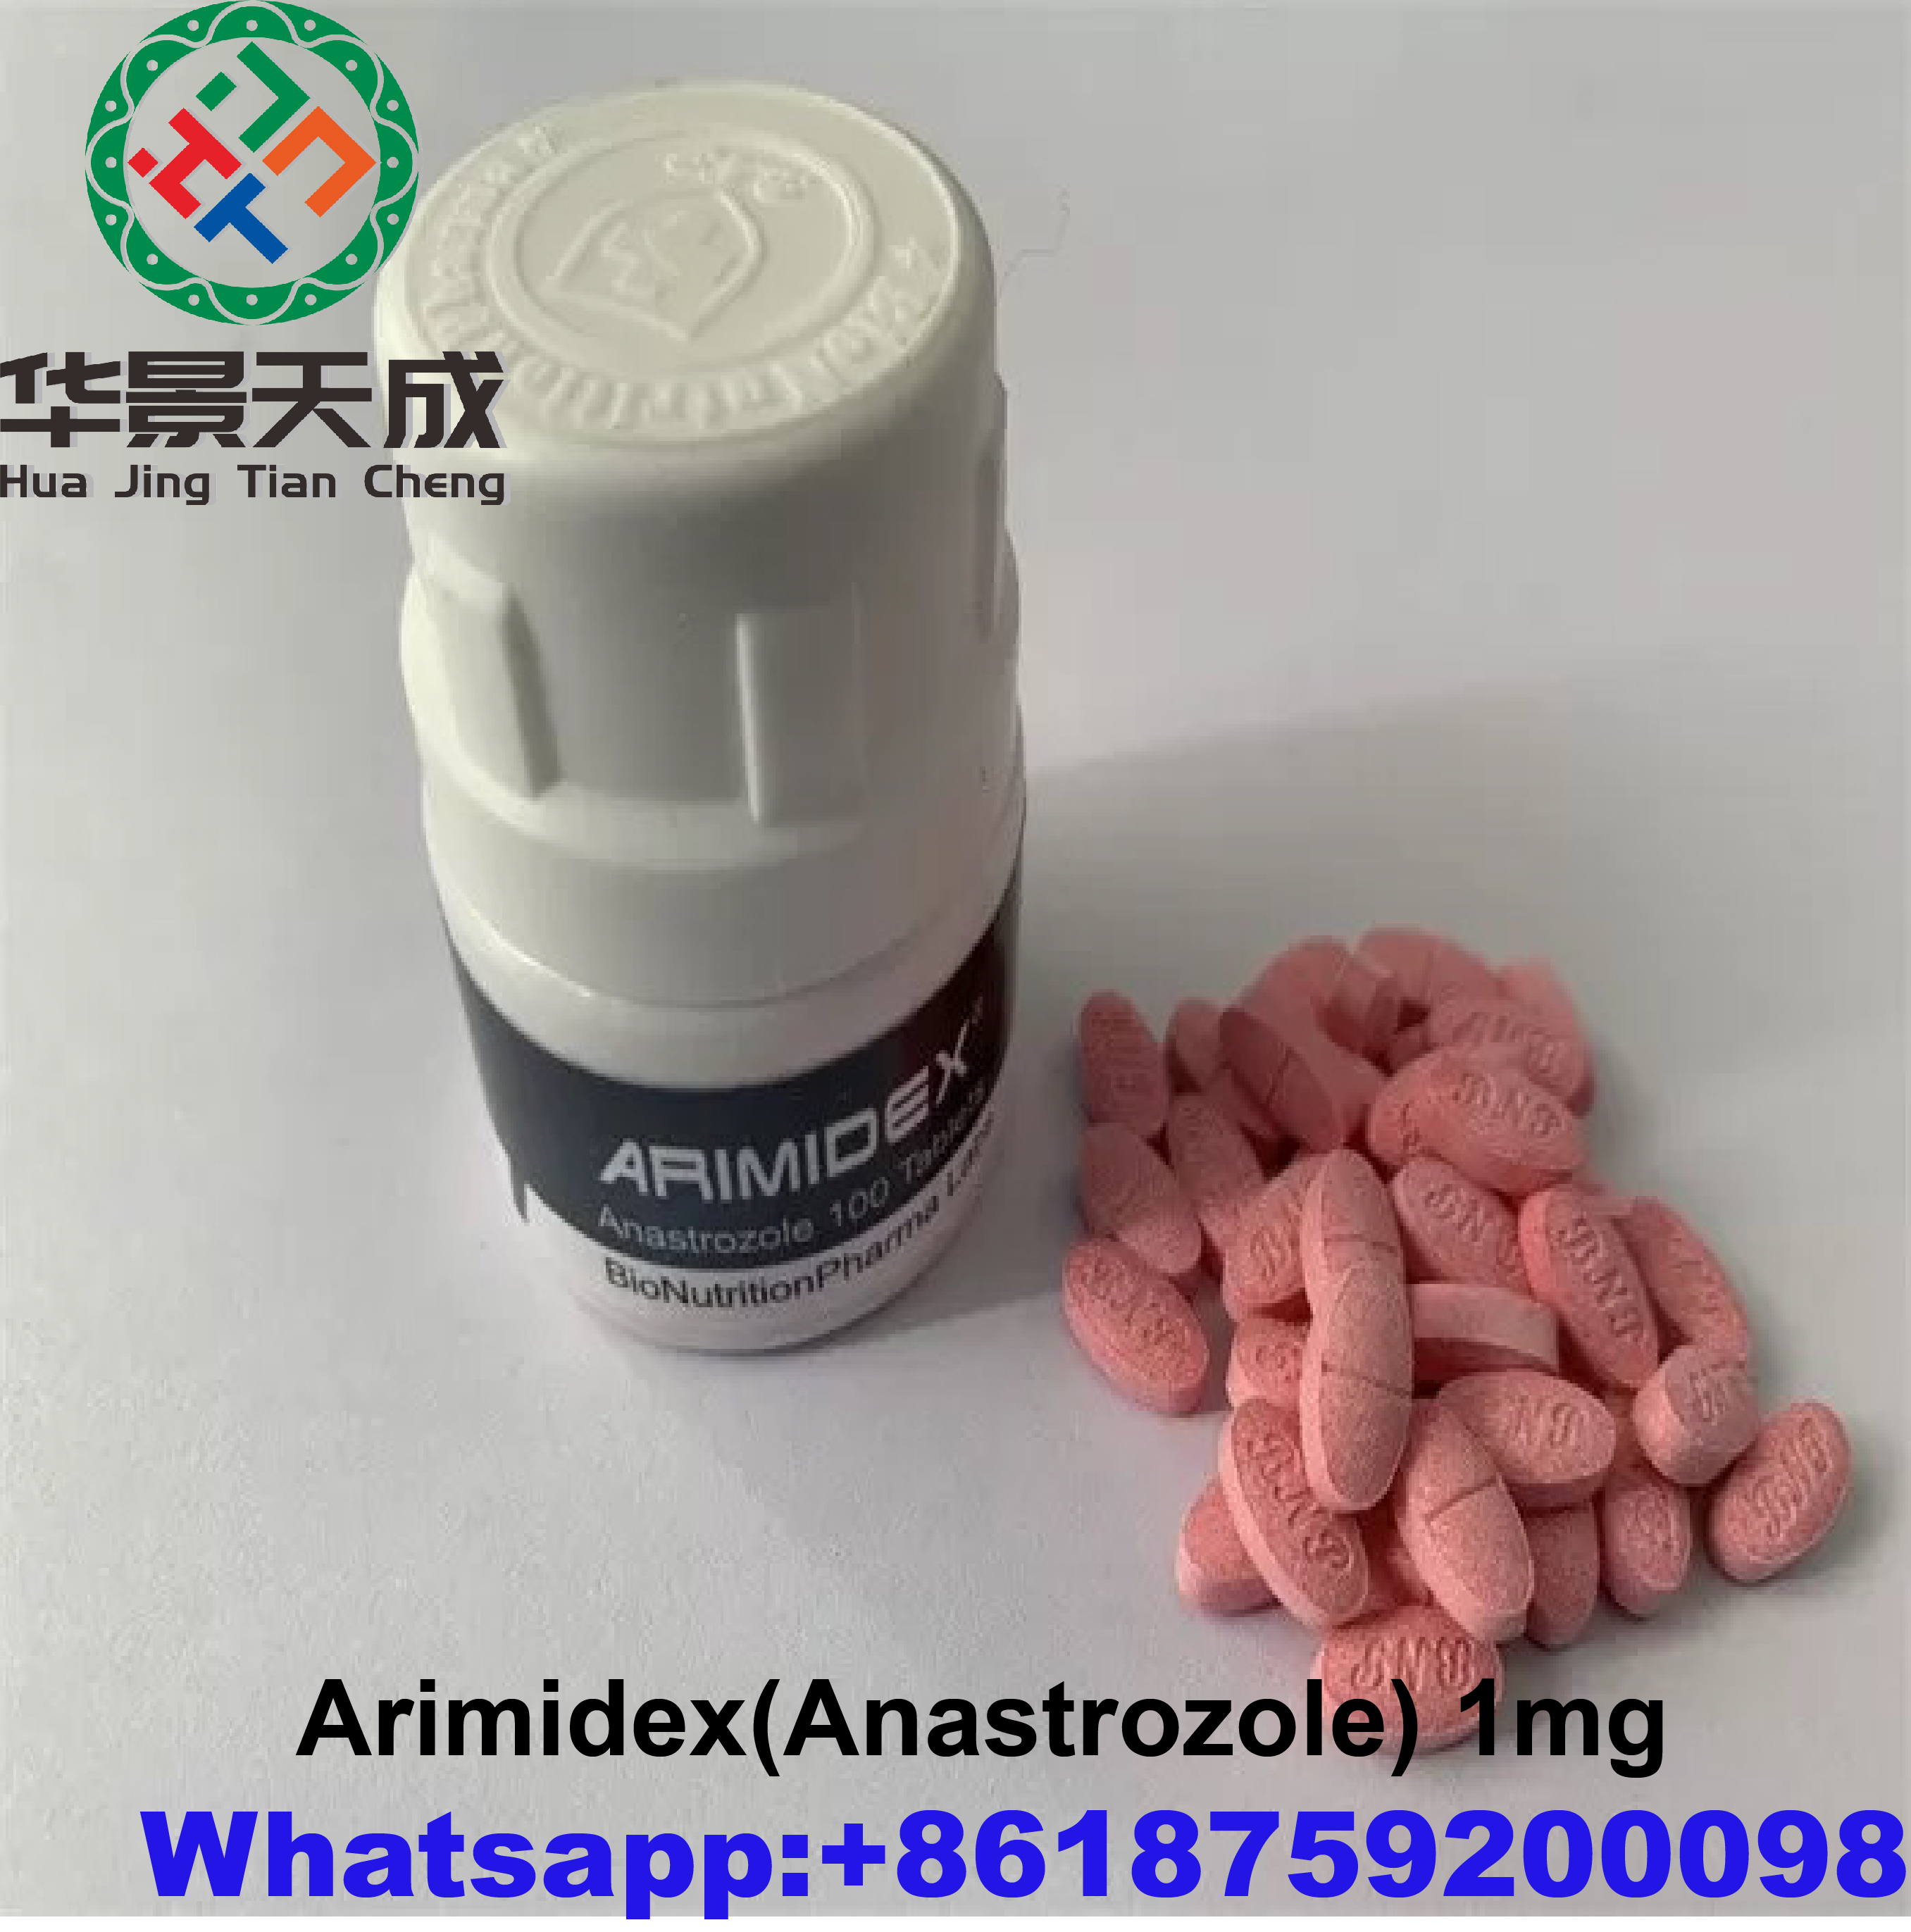 Arimidex 1mg Tablet Anti Estrogen Steroids For Breast Cancer Supplements Anastrozole 100pic/bottle Featured Image